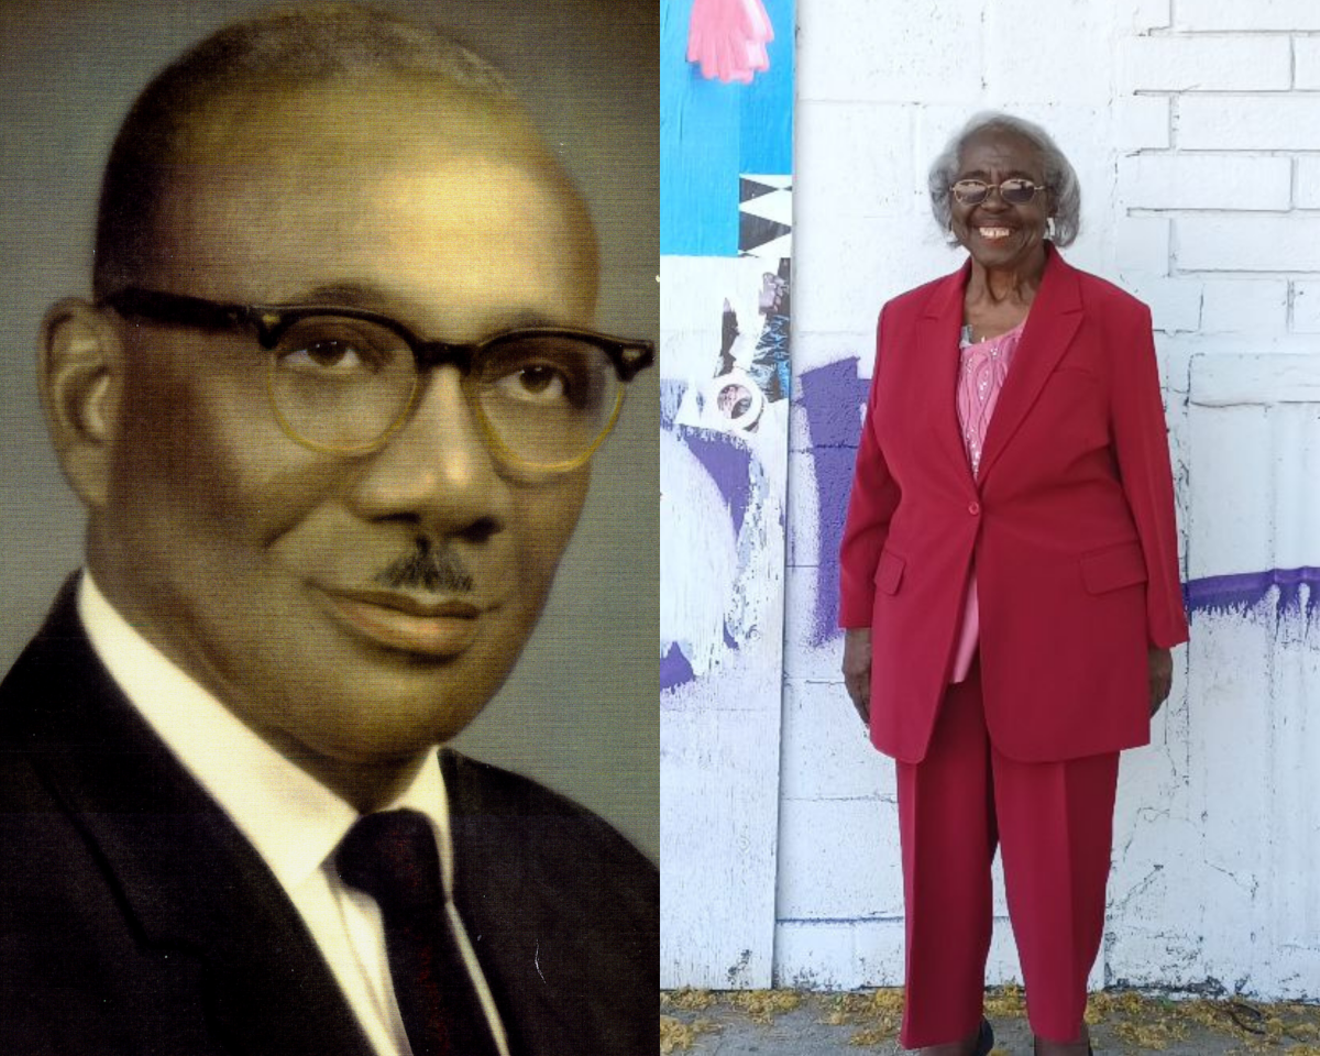 Left: A portrait of L.E. Thomas. Right: Historian Enid Pinkney, who fought to preserve Thomas' legacy.